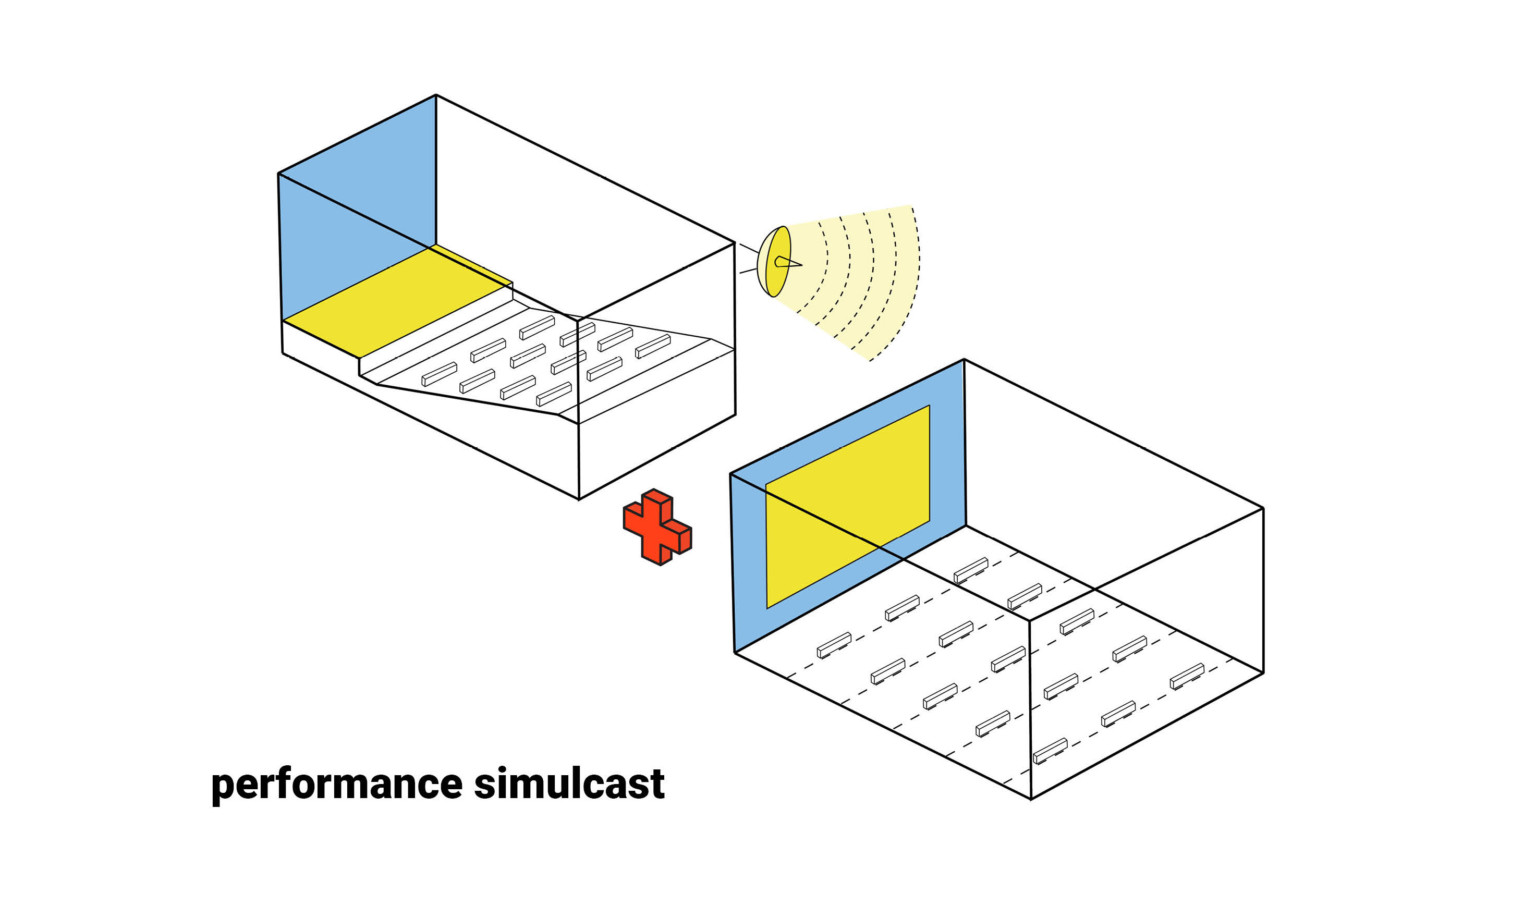 Diagram of a performance being simulcast onto a screen in another theater to allow for social distancing